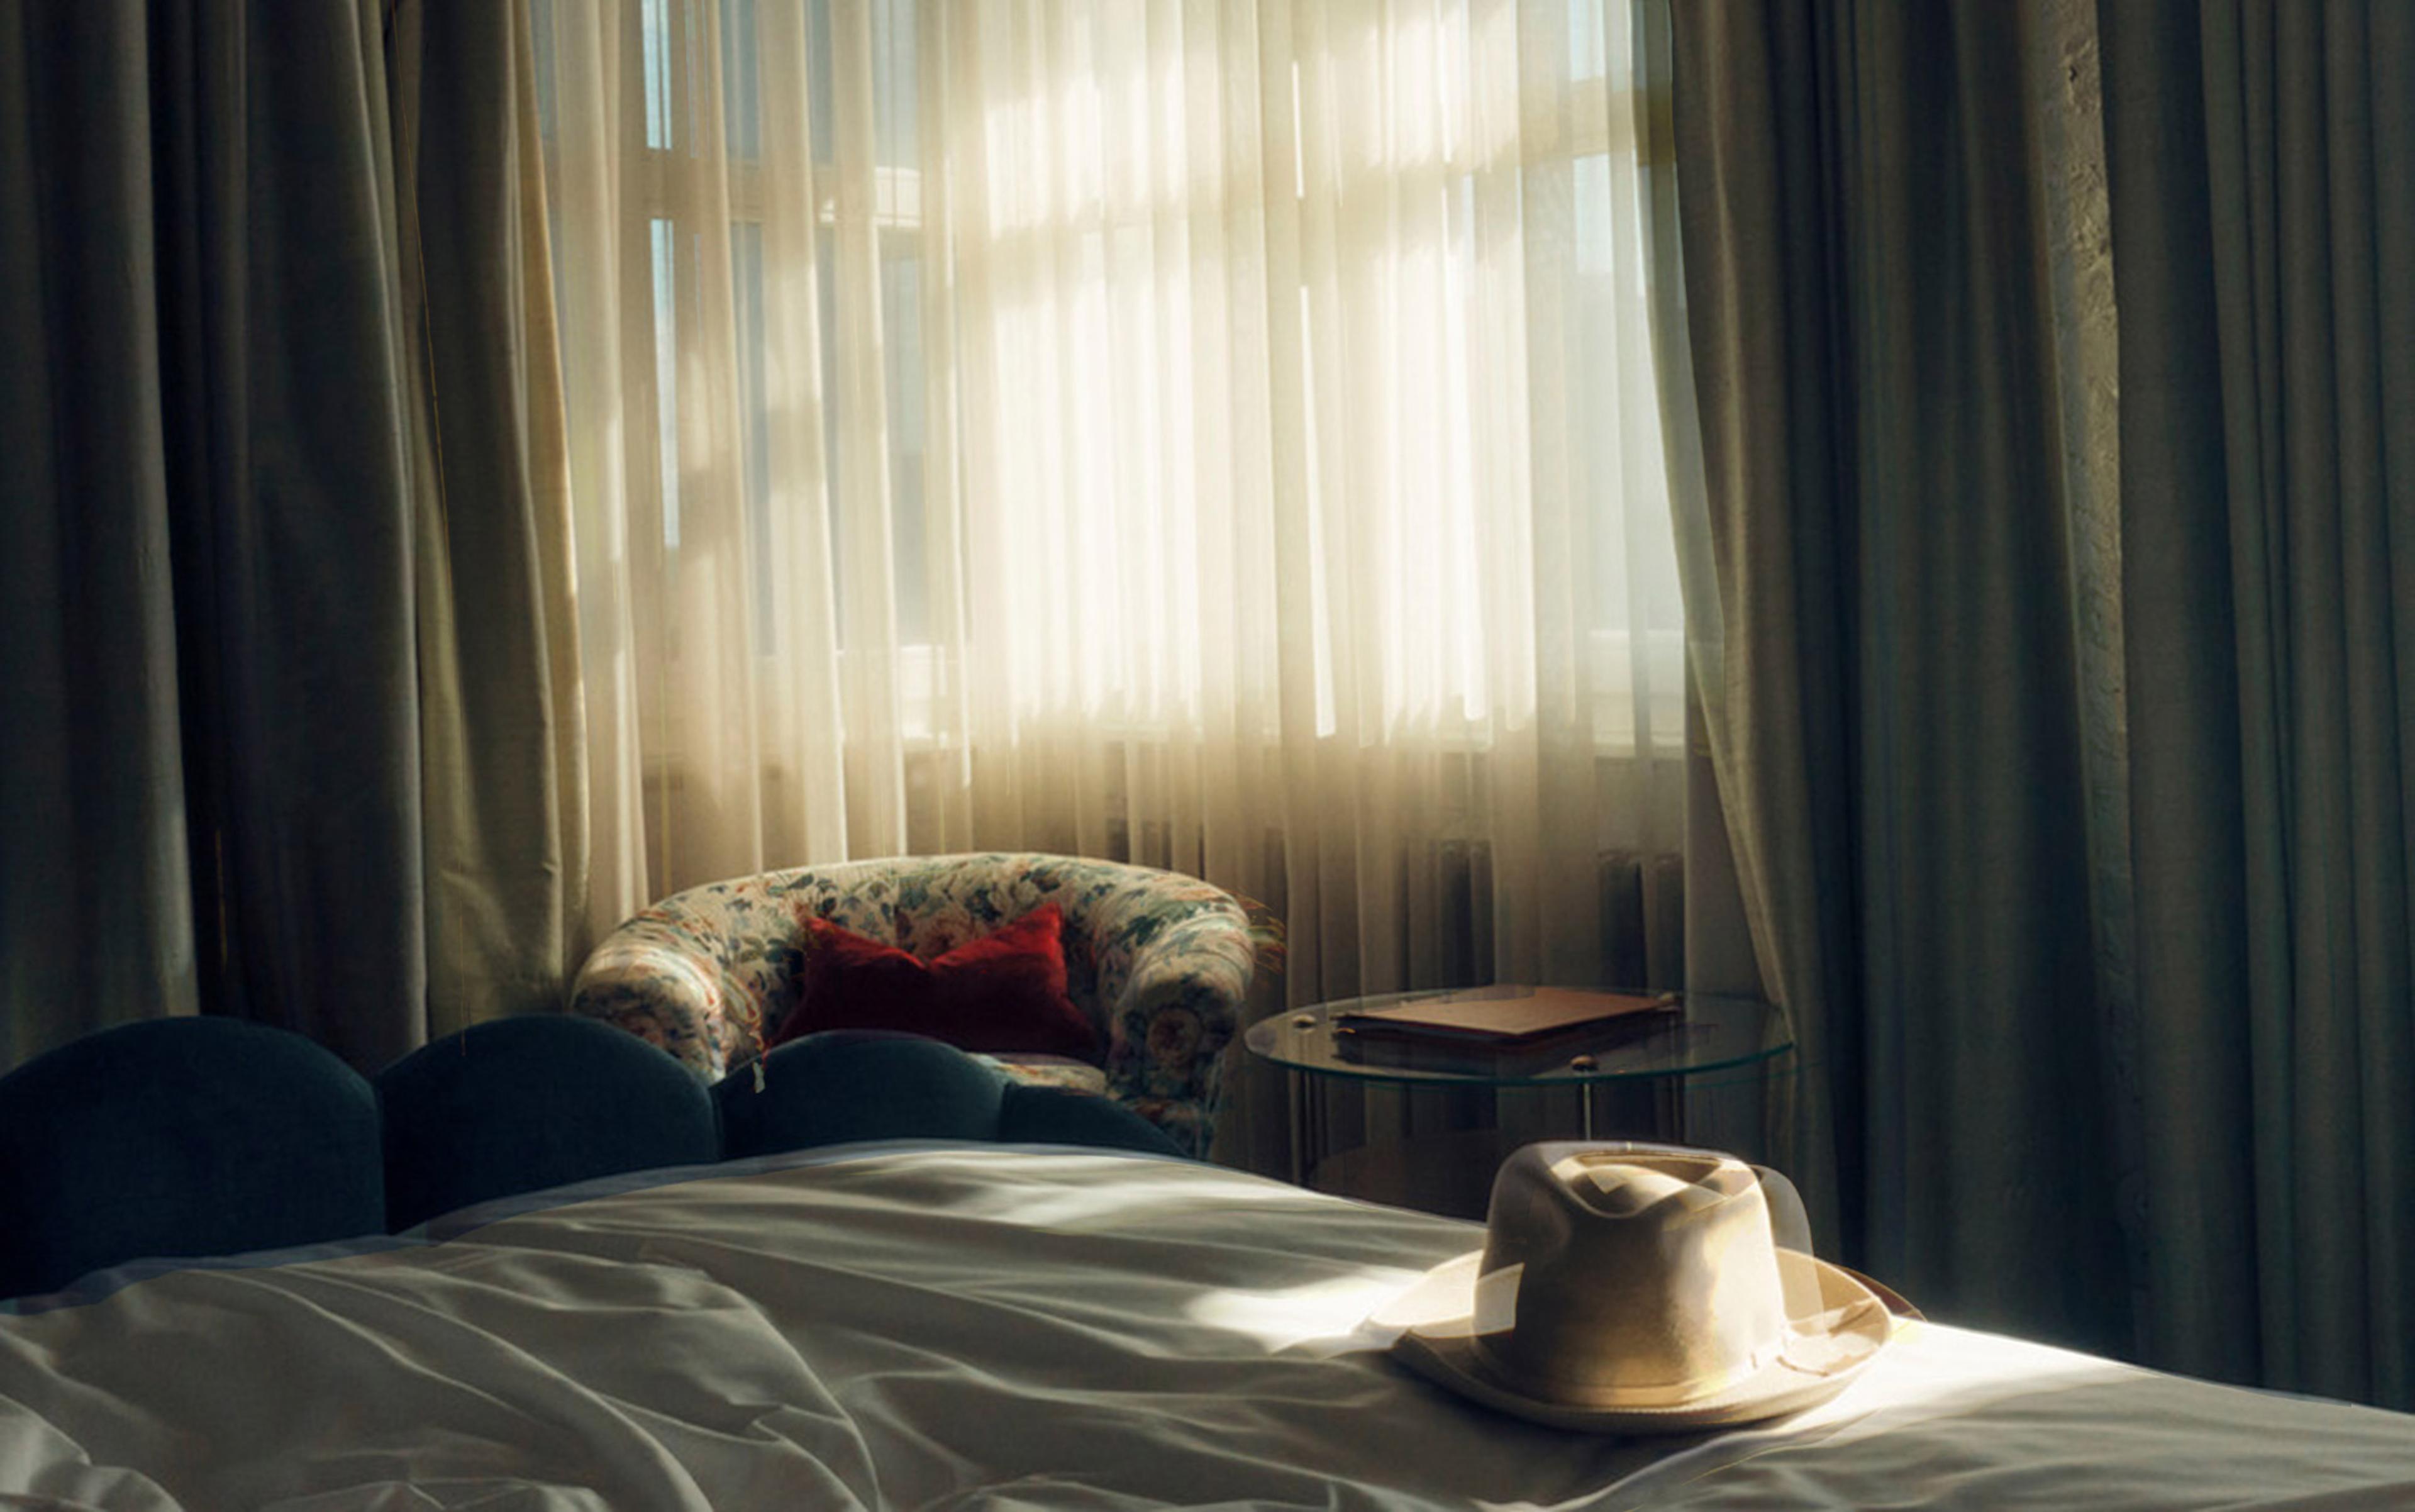 A Panama hat rests on a bed bathed in afternoon light filtering through gauze curtains. There is a slight motion blur